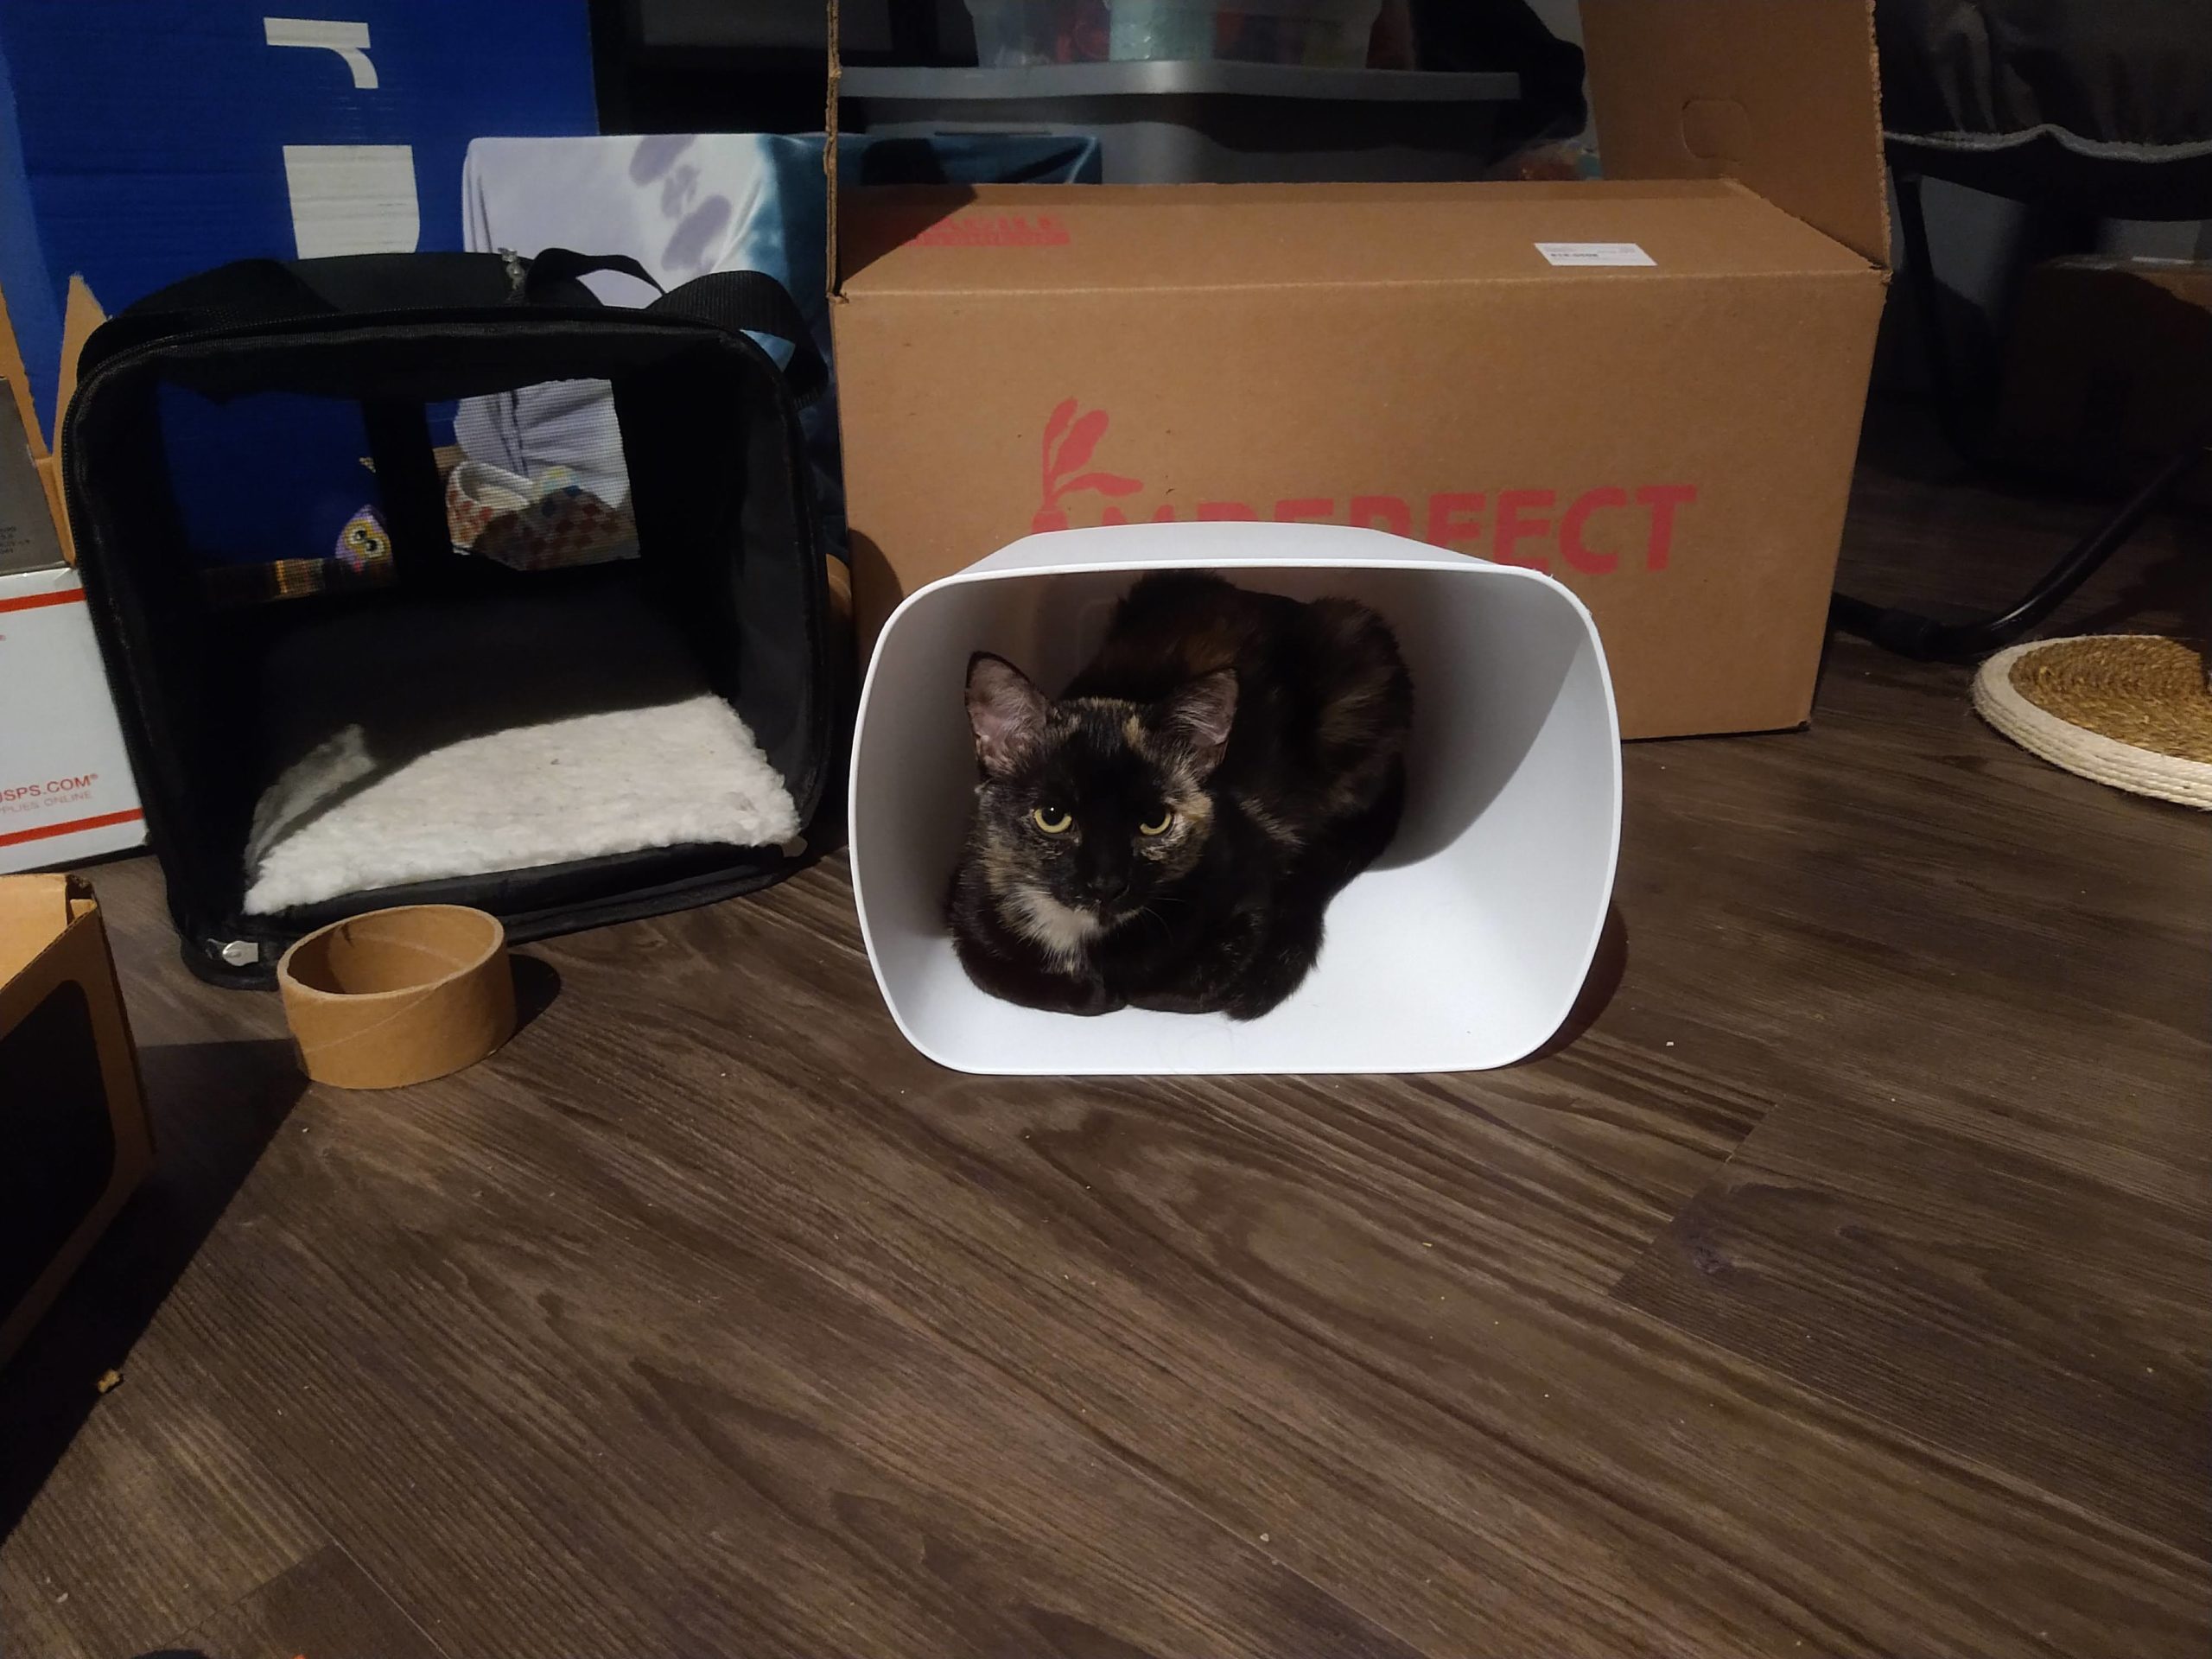 Tortie kitten loafing inside of a trash bin that's laying on the floor, surrounded by moving boxes